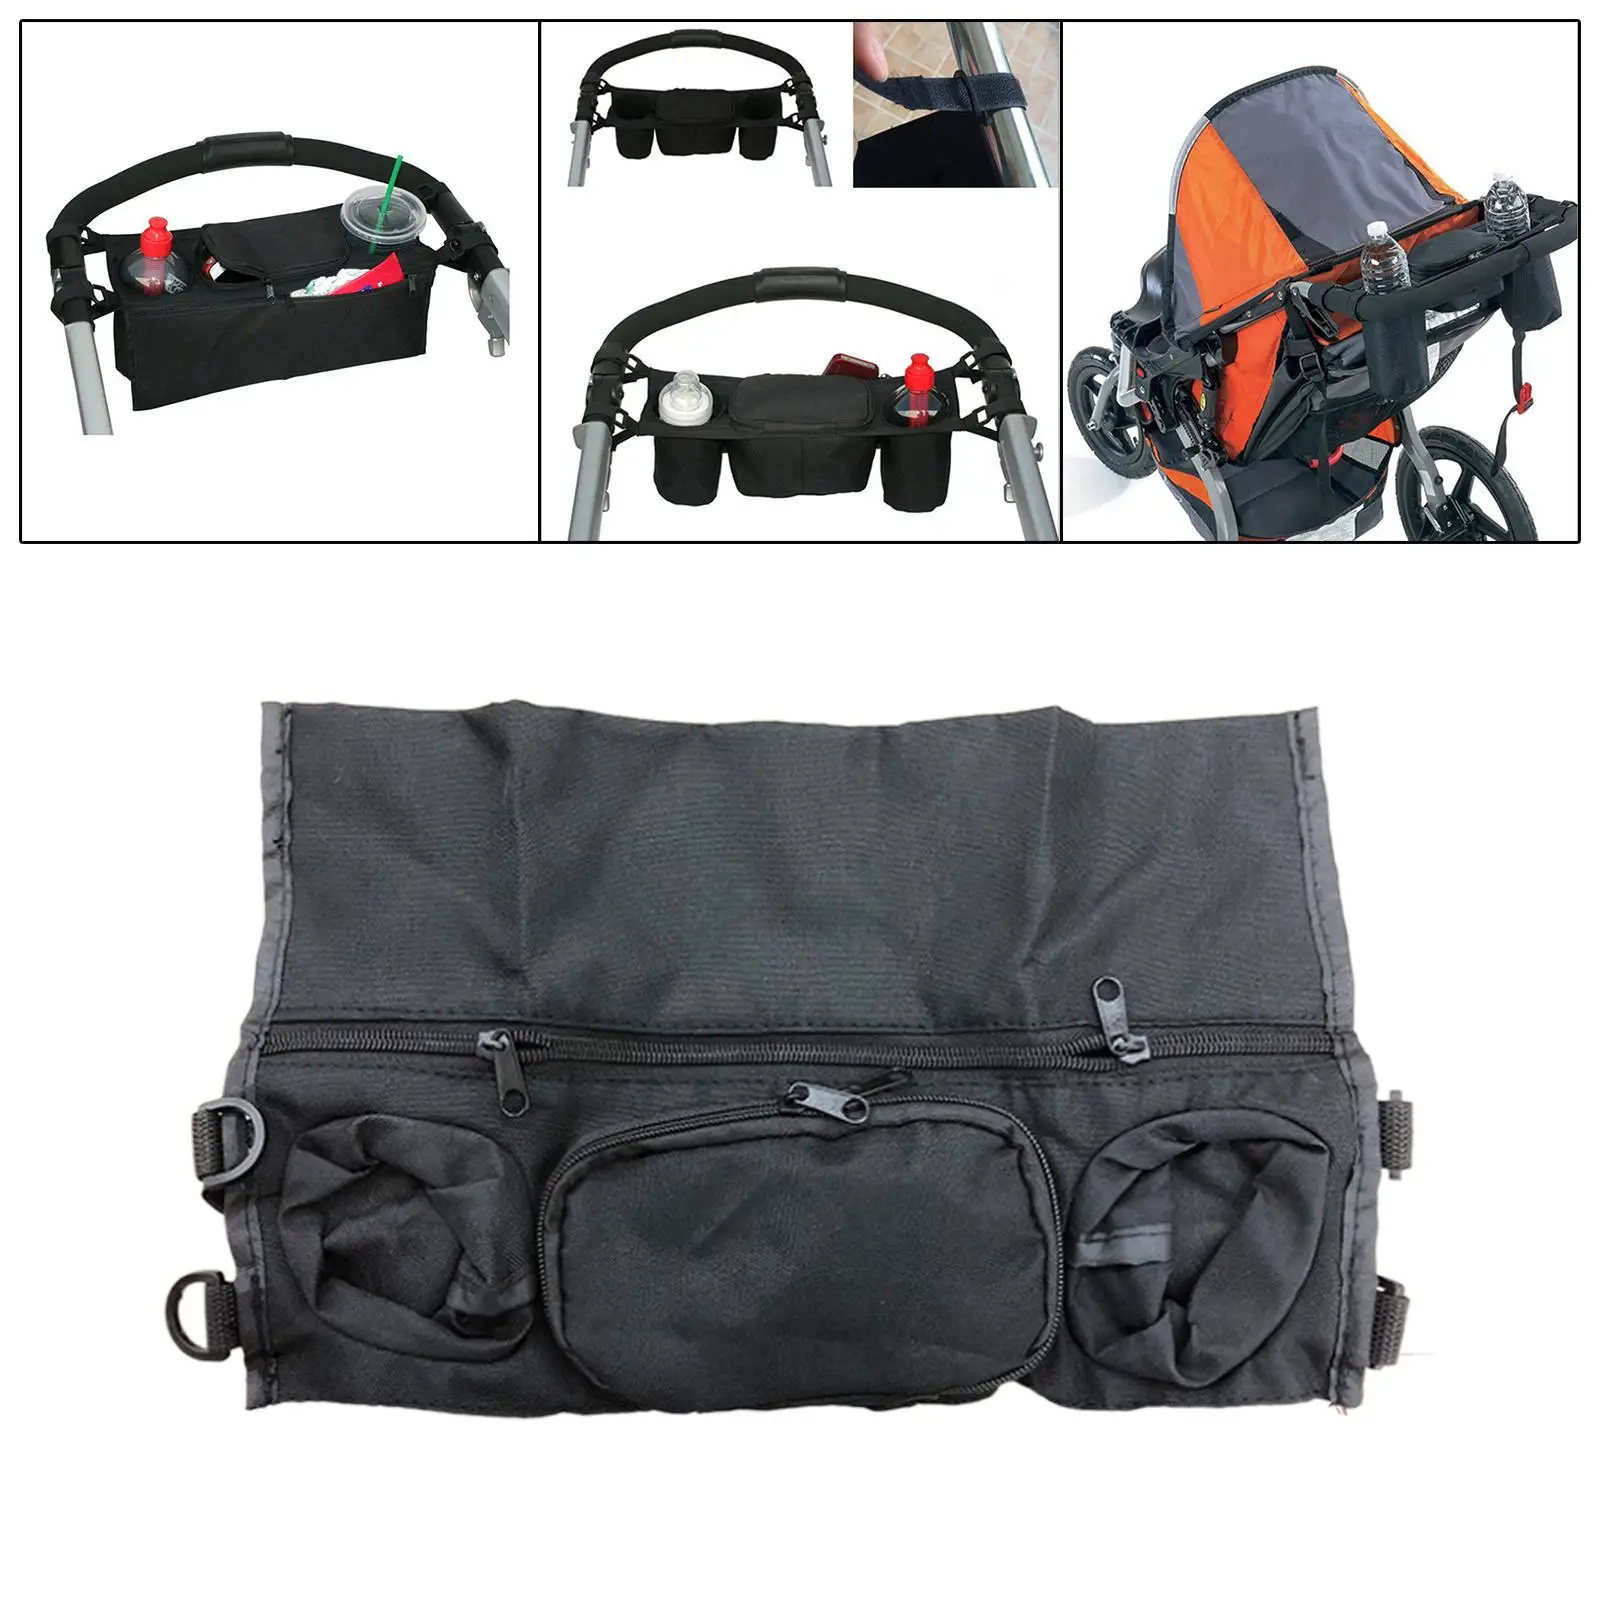 Stroller Organizer Bag Multifunction Large Space Multiple Zipper Pockets with Zipper Nursery Storage bags easy Installation